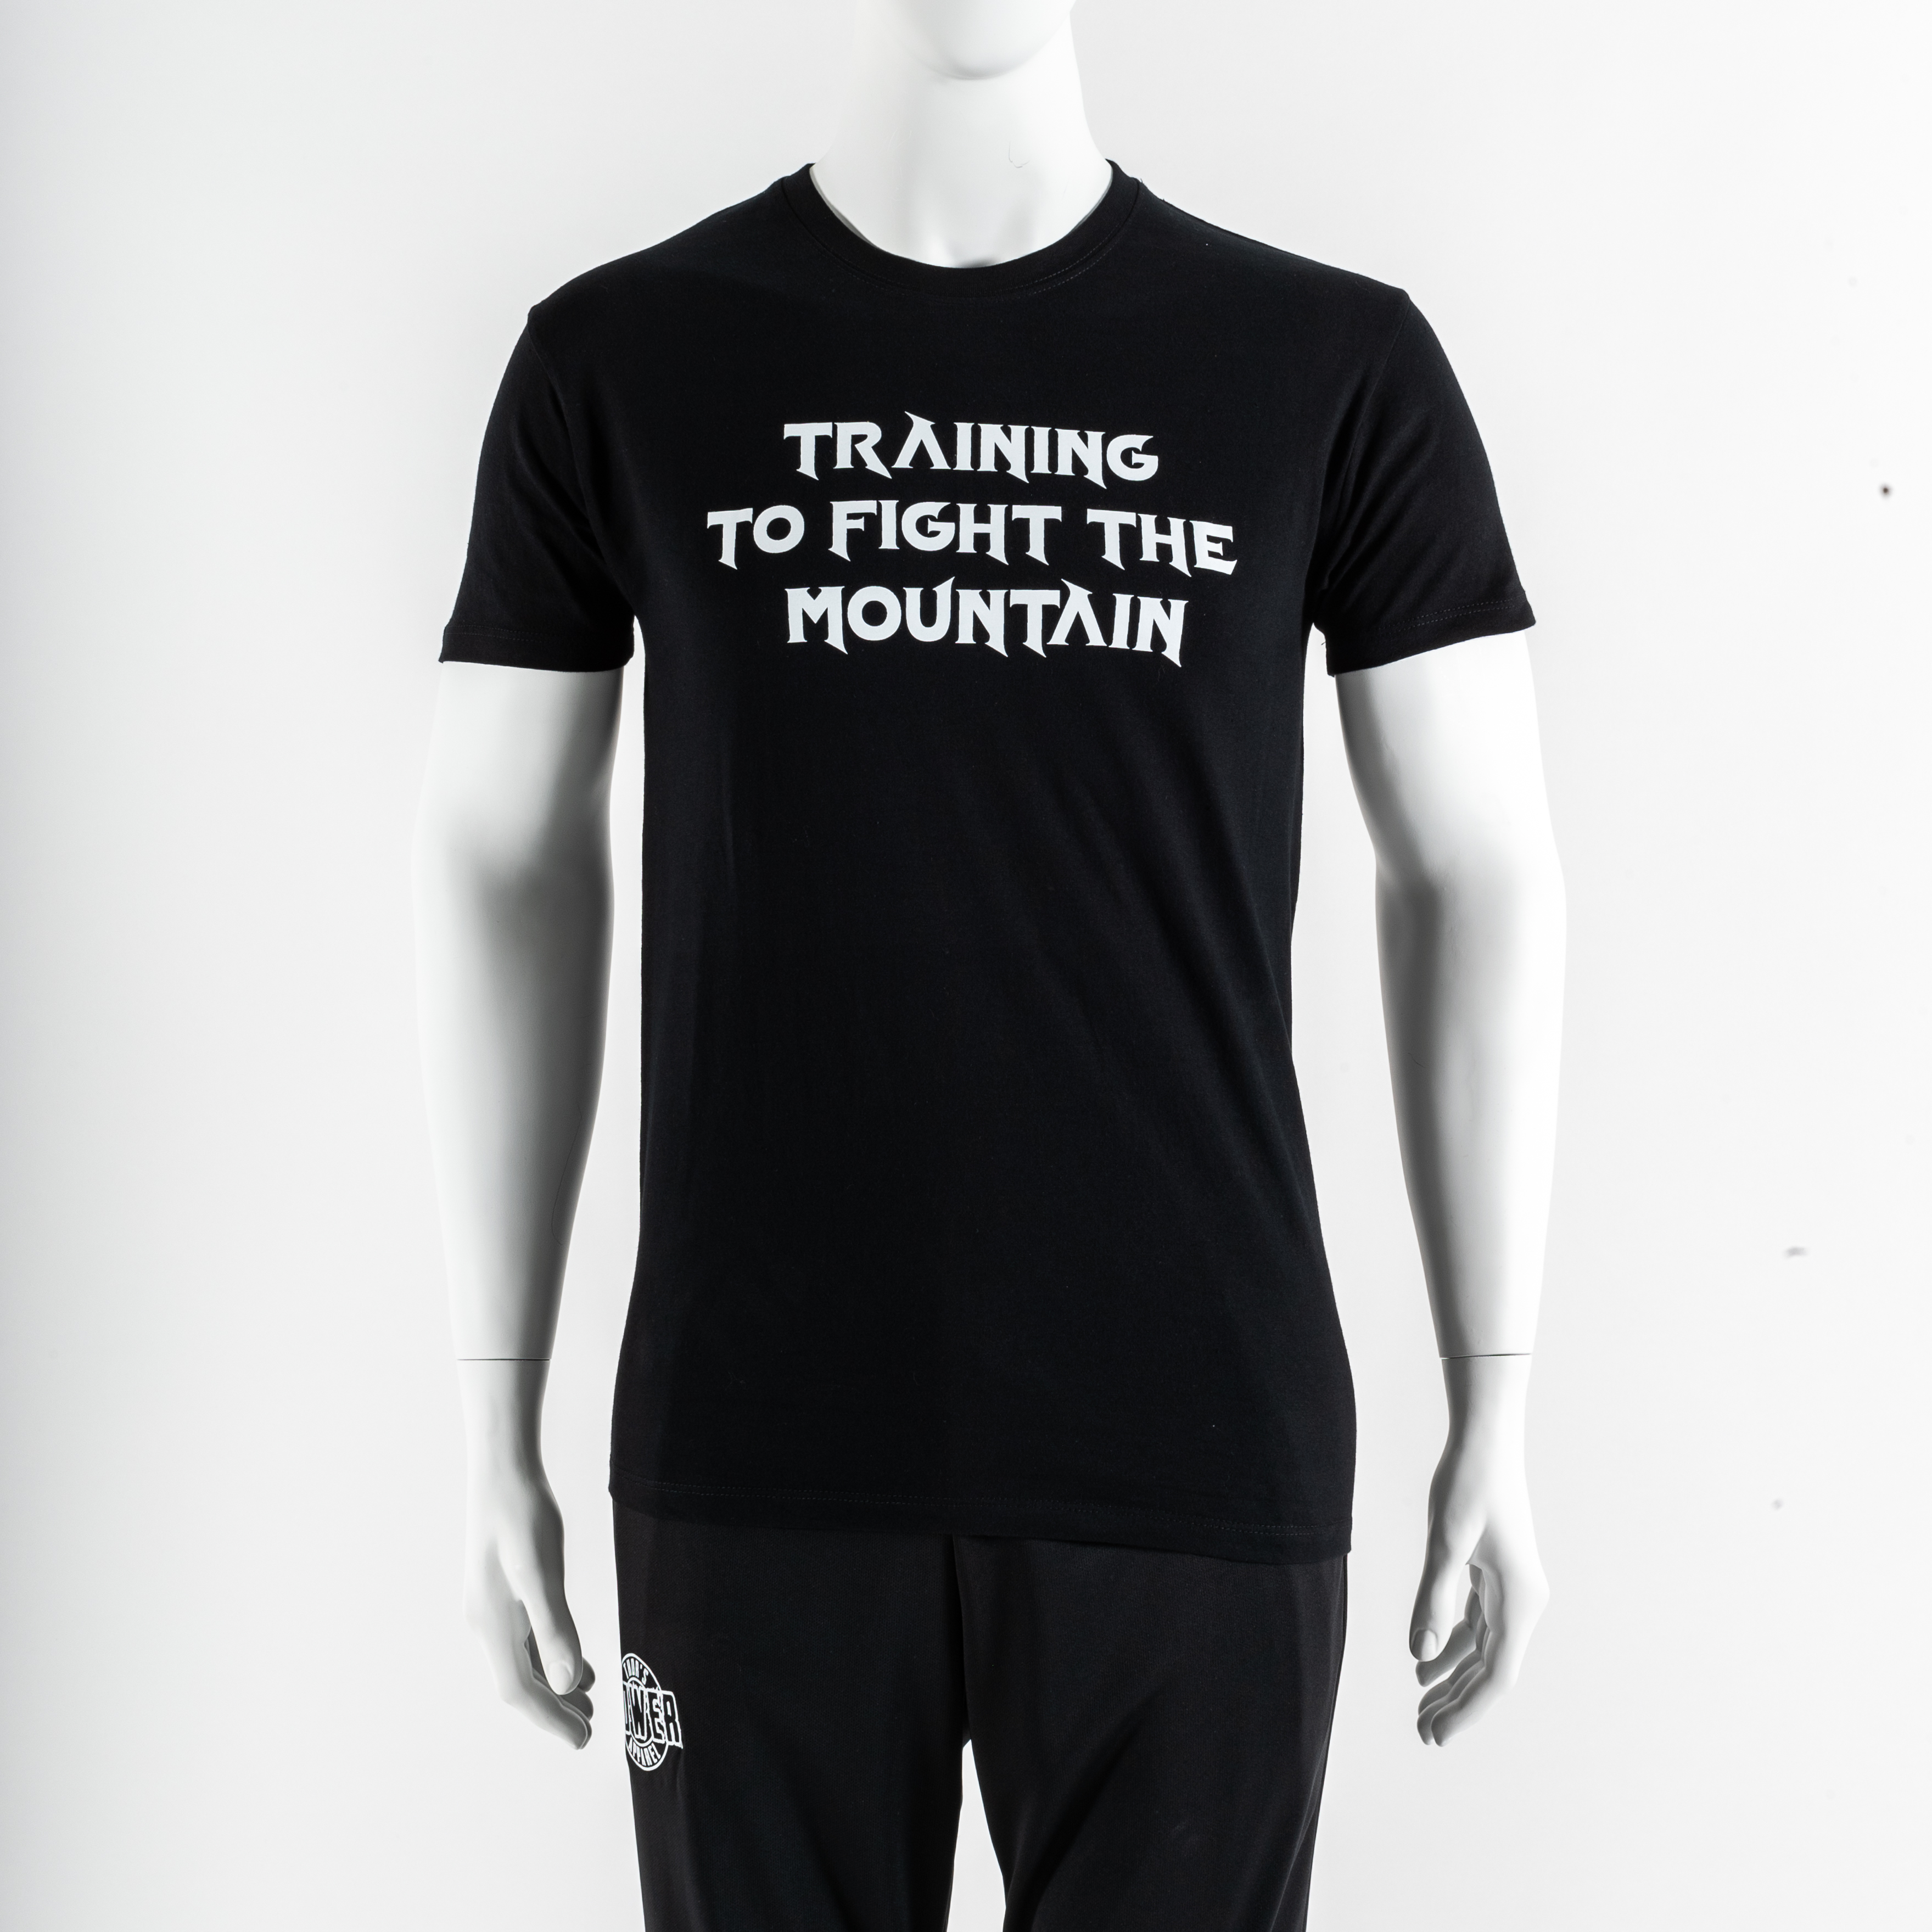 T-SHIRT - TRAINING TO FIGHT THE MOUNTAIN